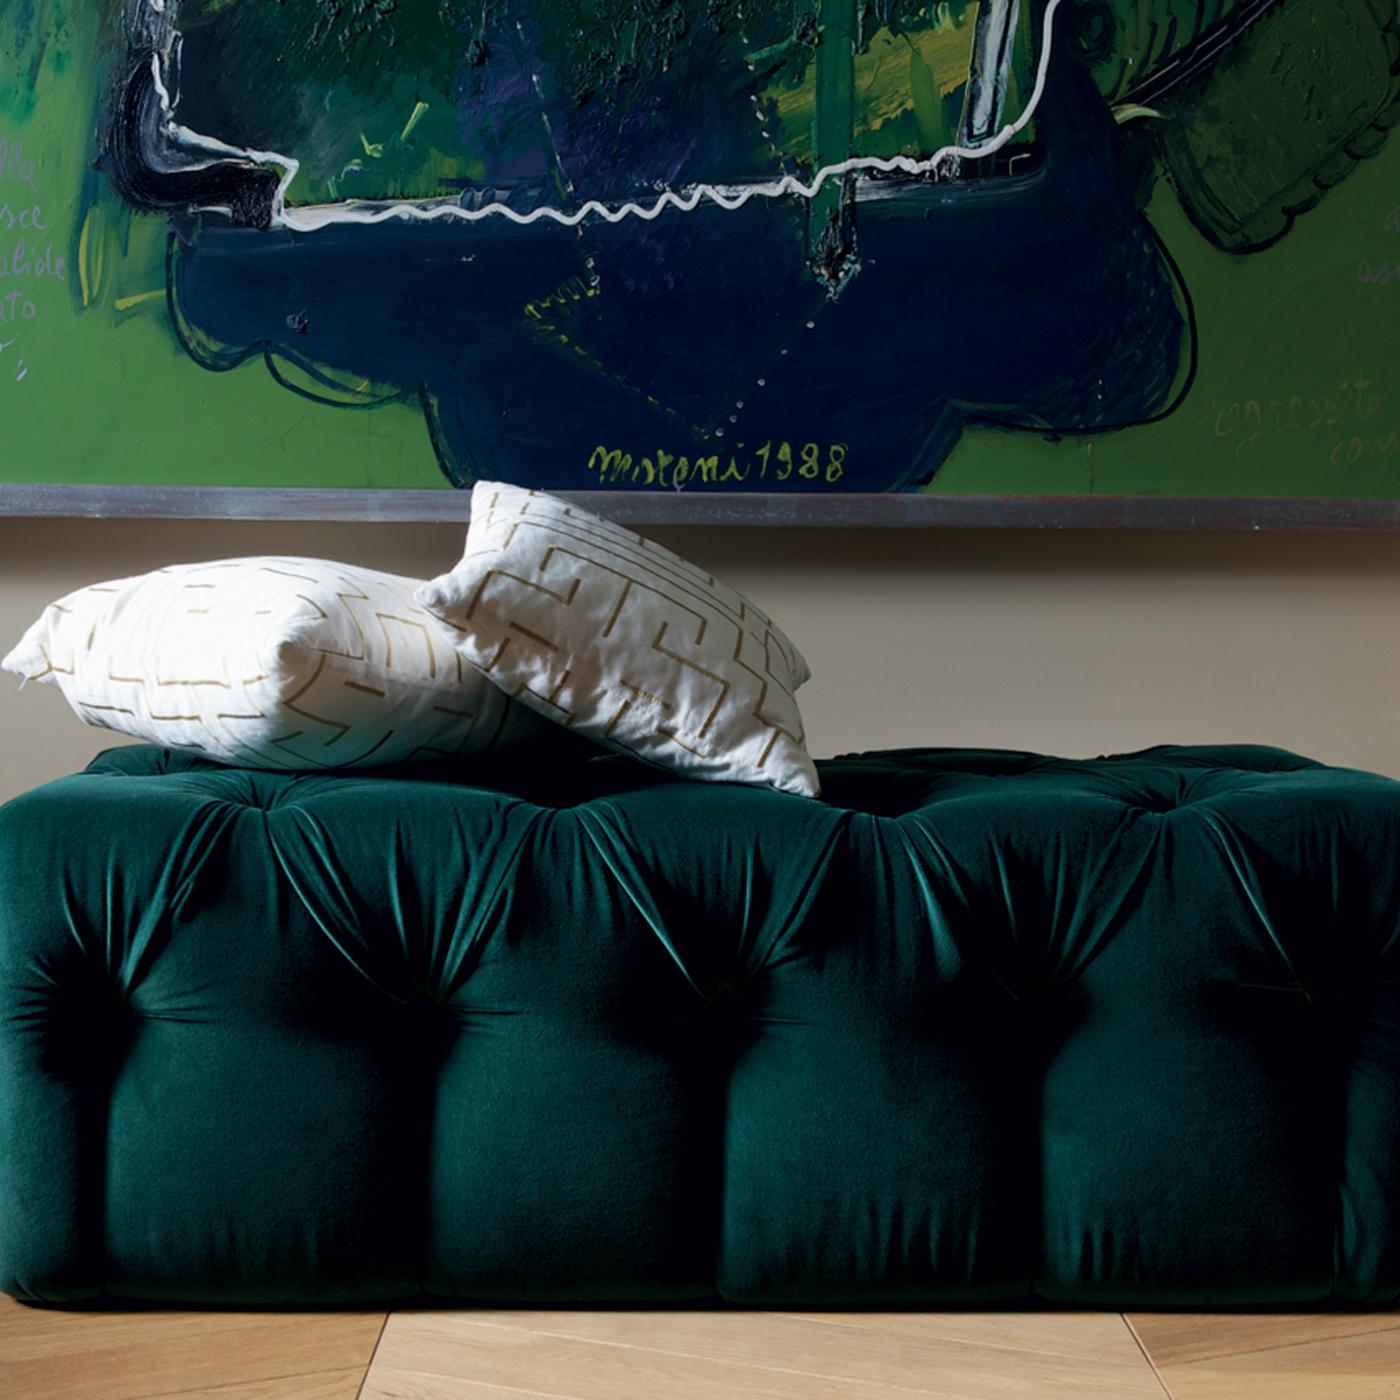 Entirely detailed by hand using the capitonne' technique, this sophisticated pouf boasts exquisite, tufted details on the hunter-green velvet upholstery that add classic elegance to the simple, rectangular frame. Either as a plush, comfortable seat,